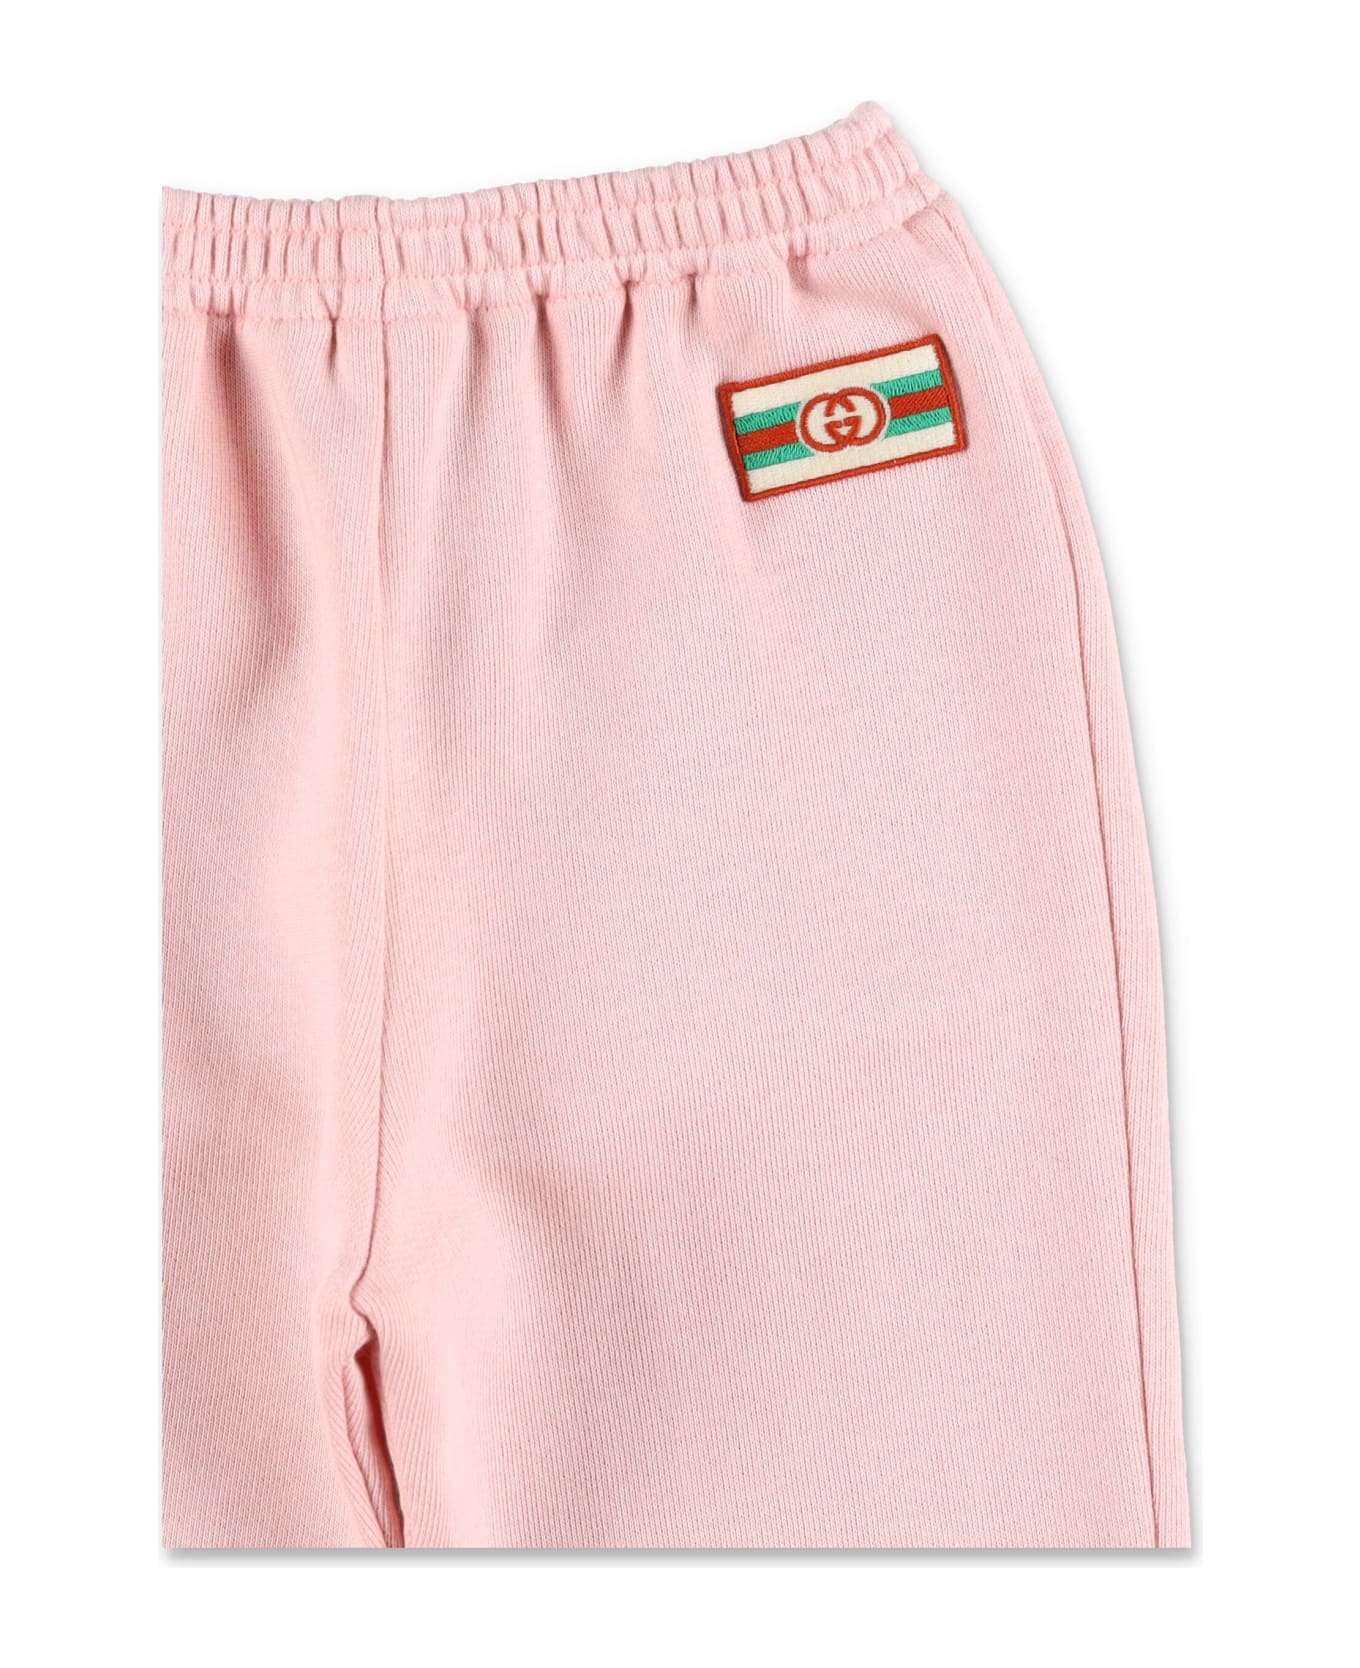 Gucci Baby Jogging Coordinates Trousers